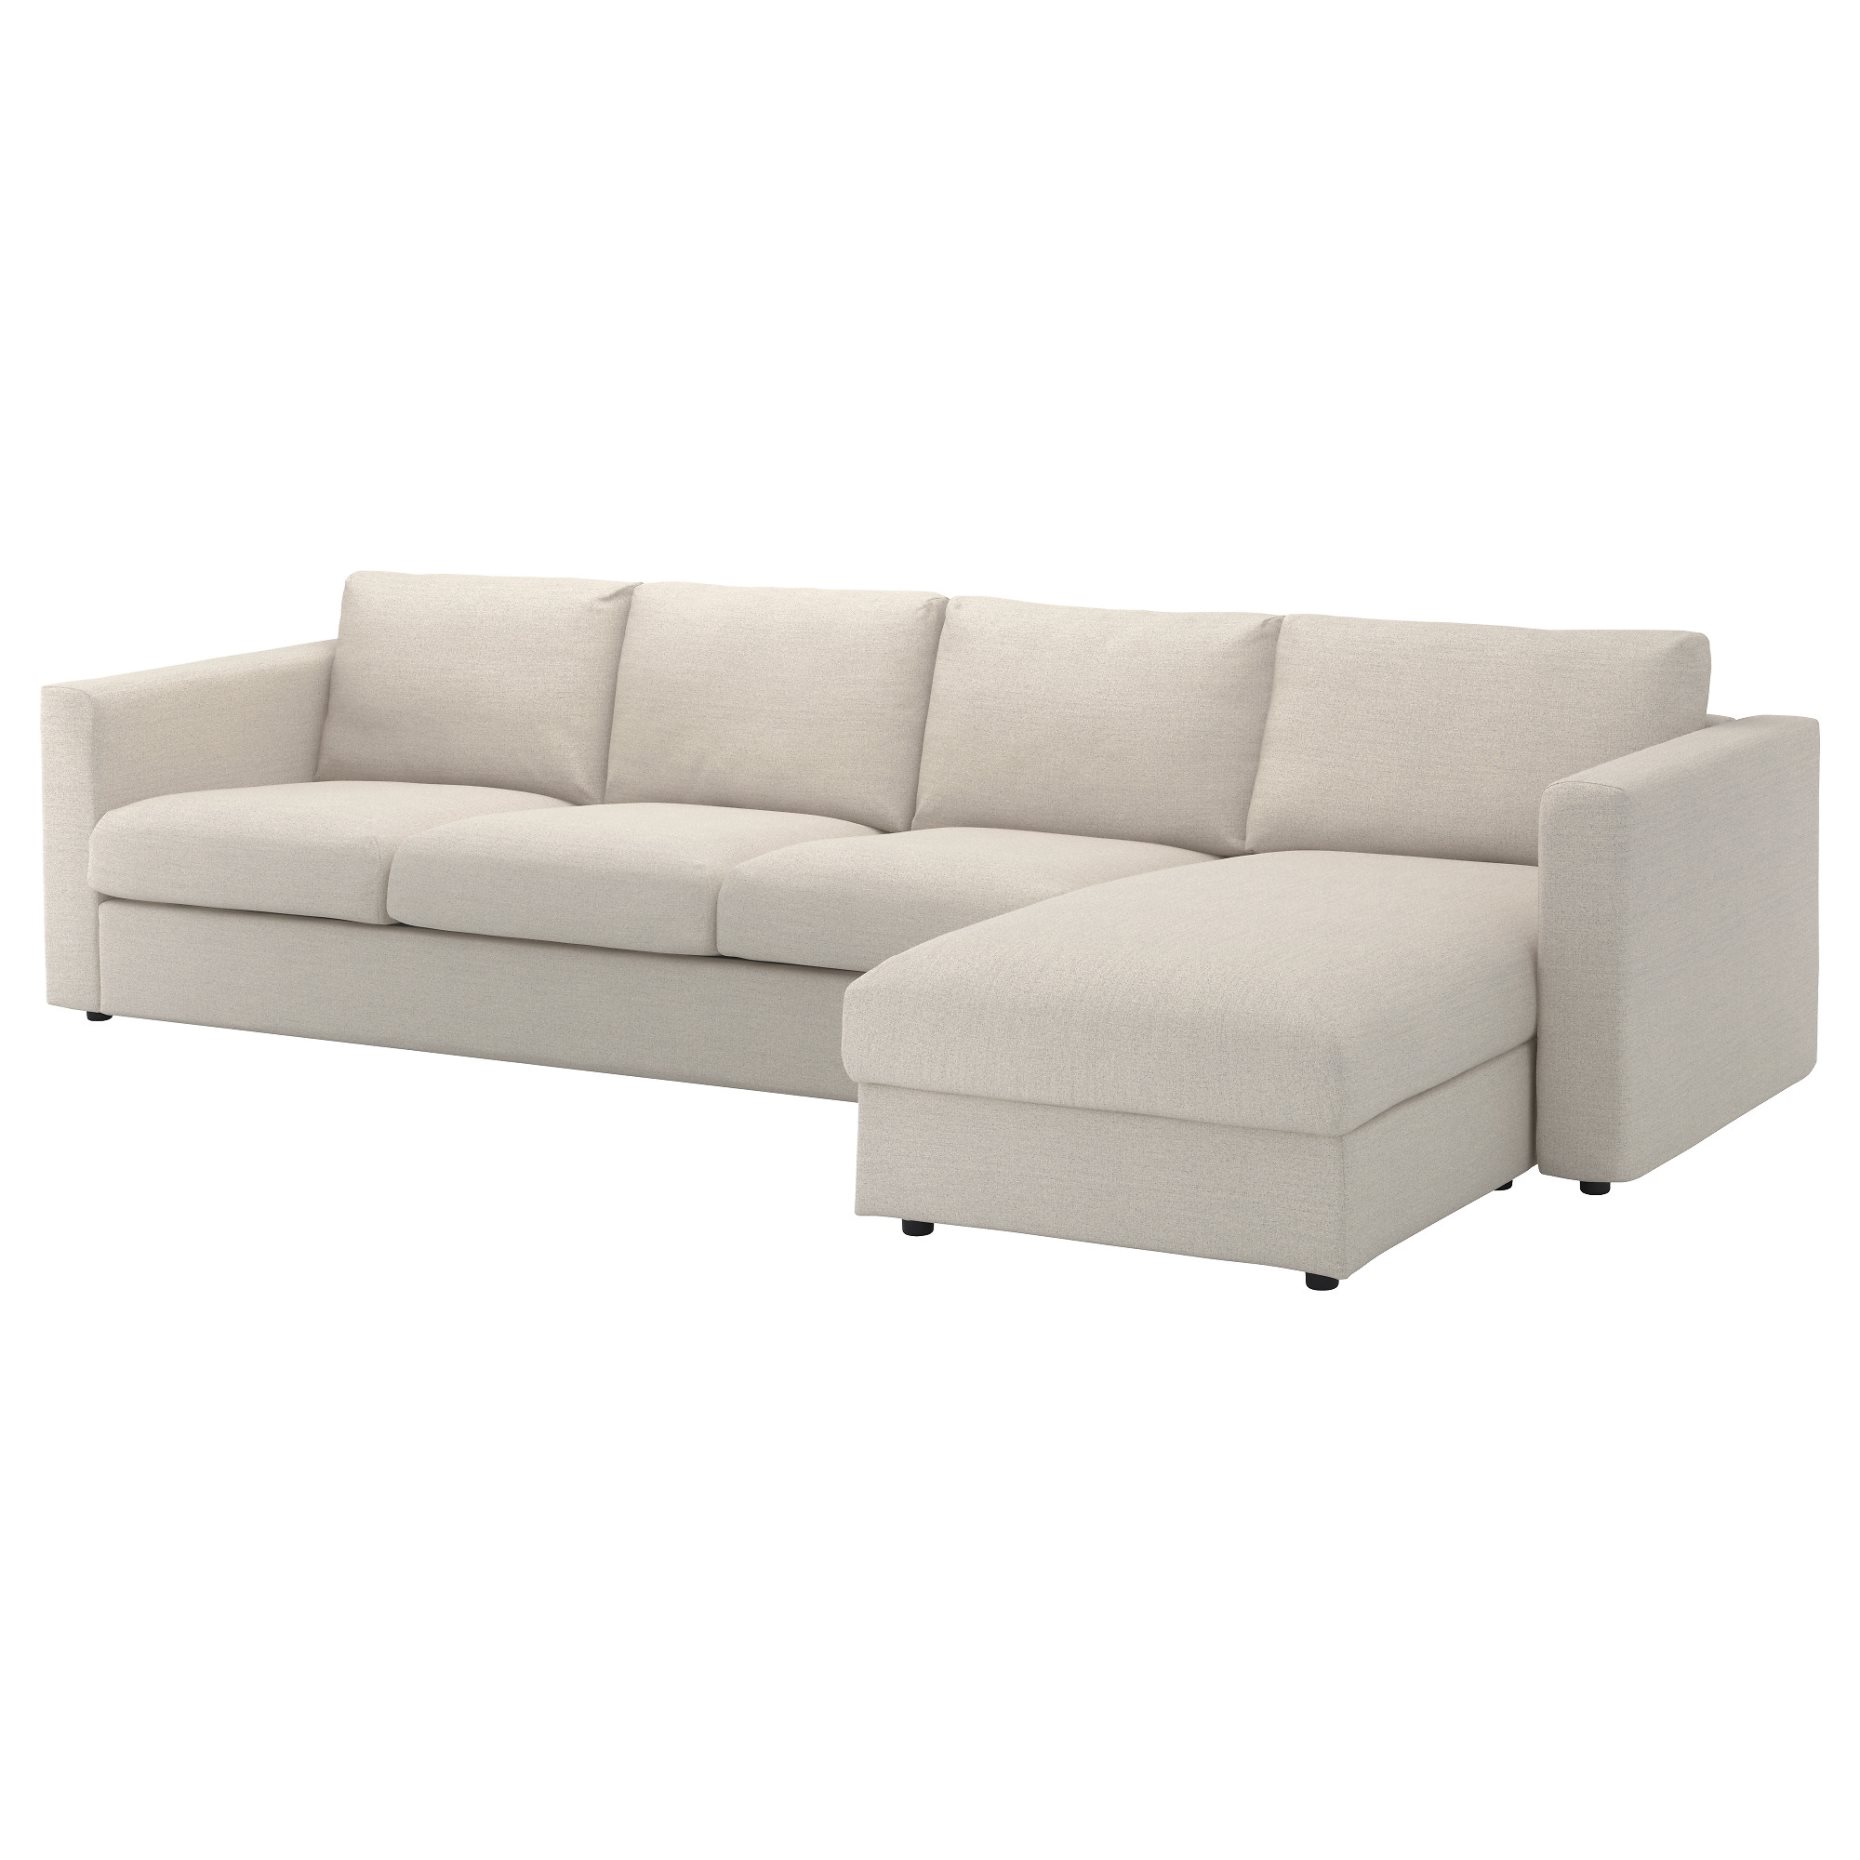 VIMLE, 4-seat sofa with chaise longue, 893.994.83